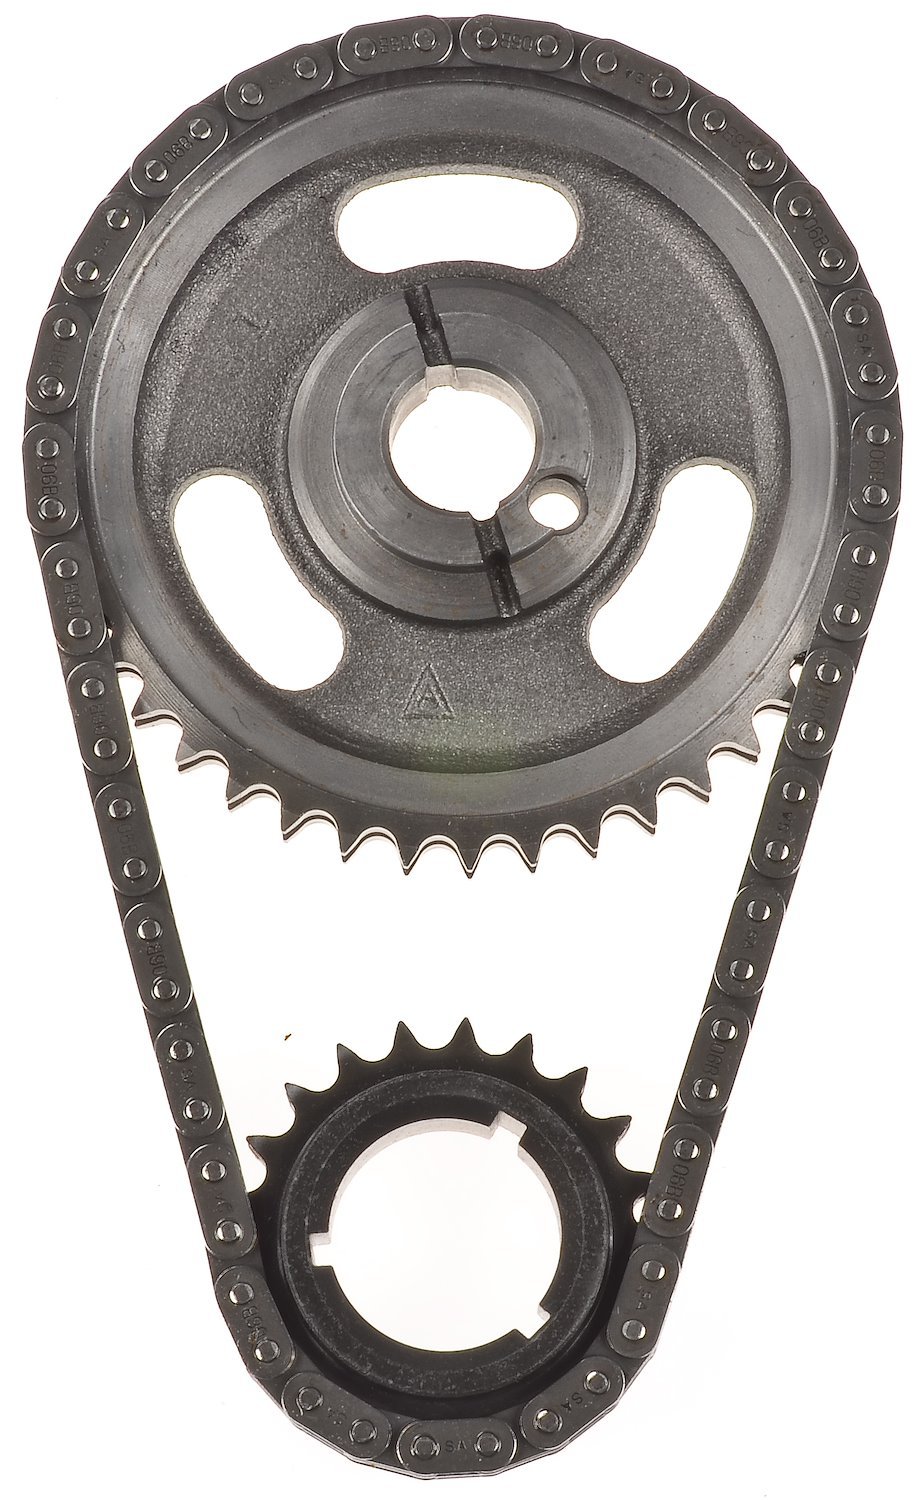 Timing Chain Set for 1965-1972 Small Block Ford 289-302-351W